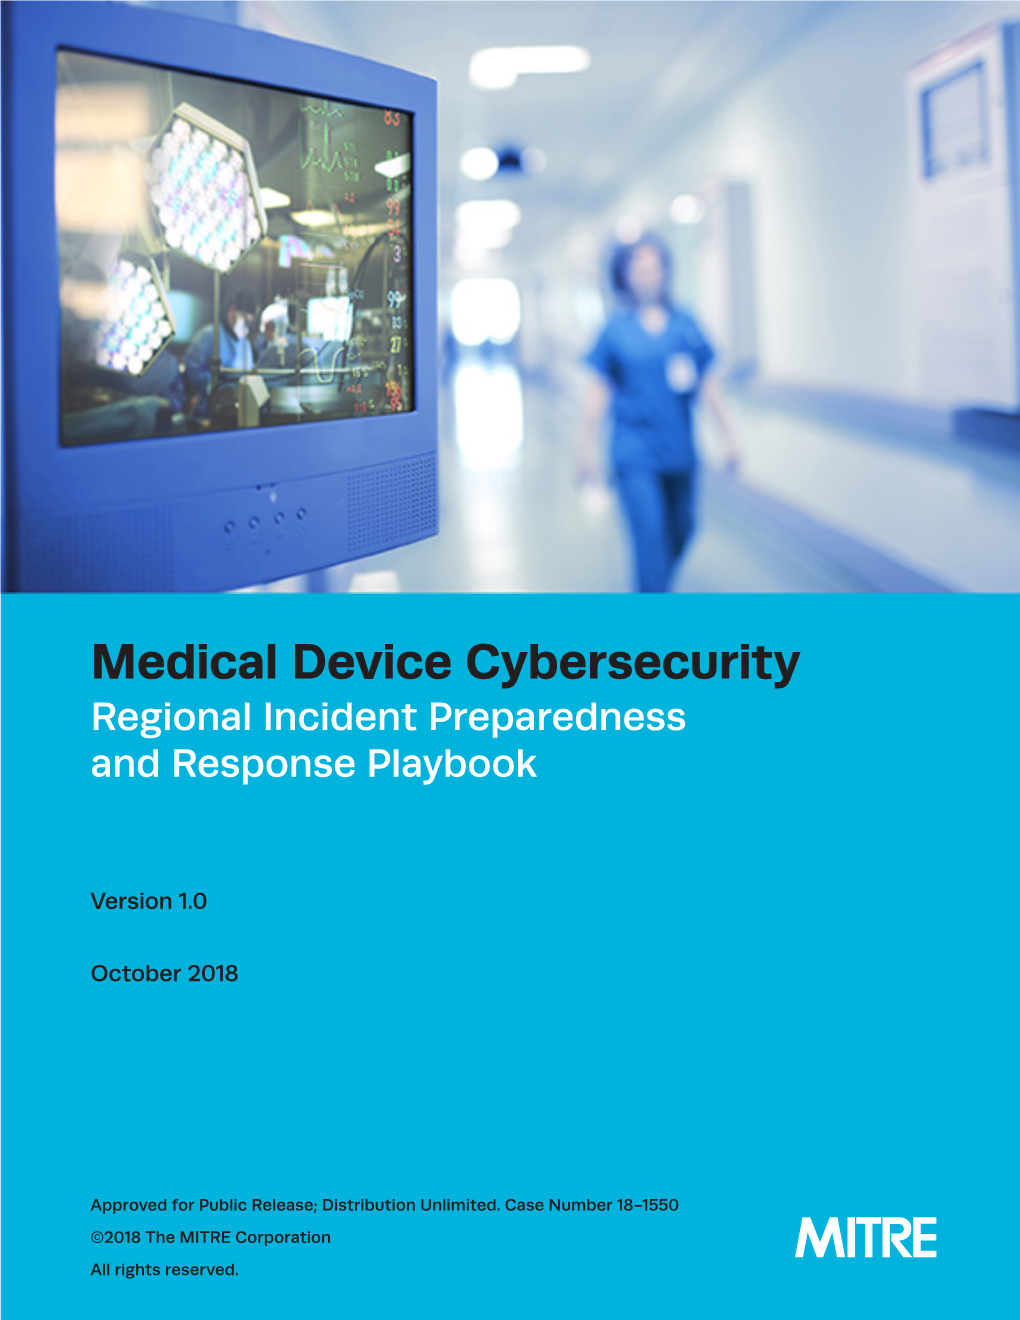 Medical Device Cybersecurity Playbook